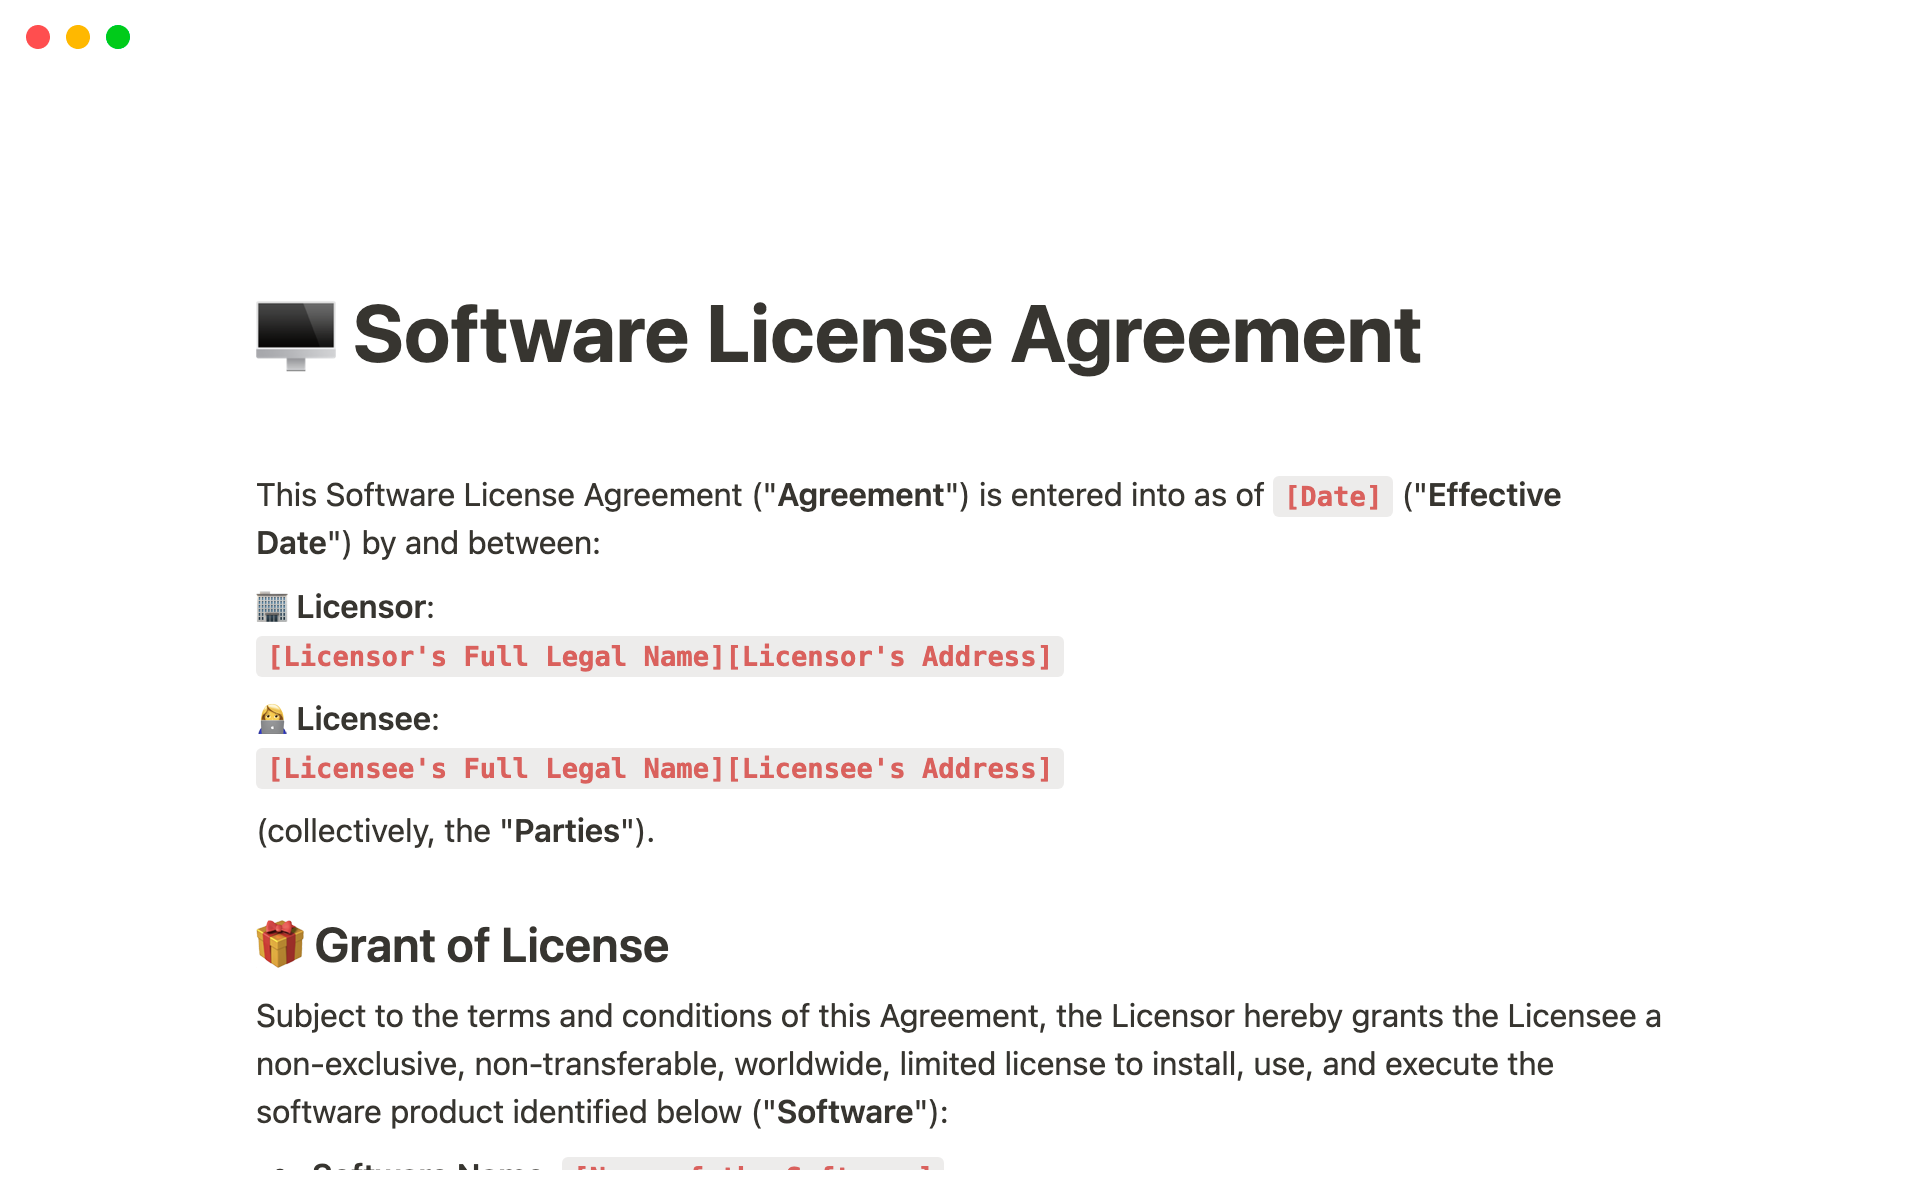 This Software License Agreement template provides a comprehensive outline of terms for licensing software products.